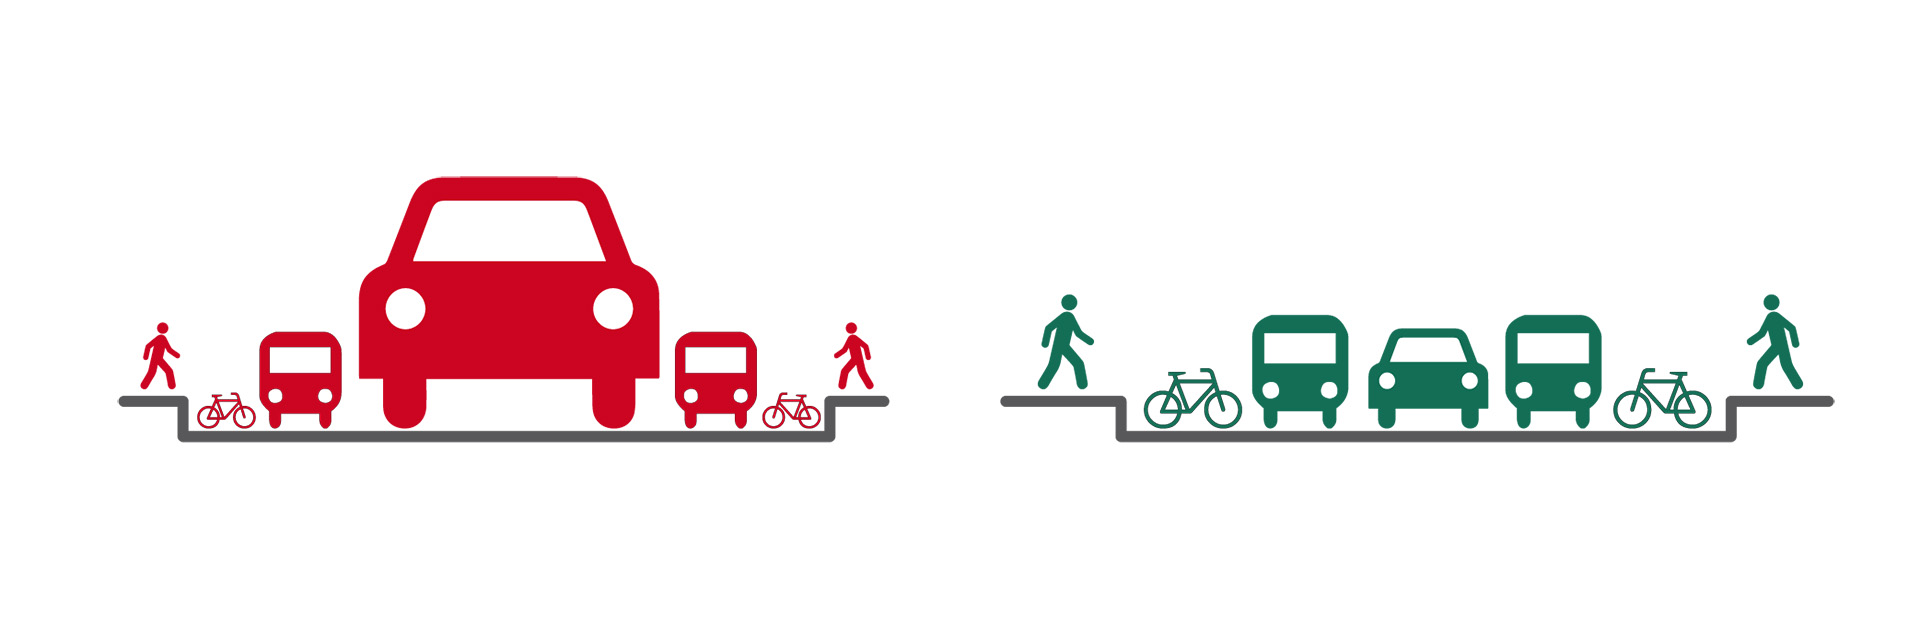 Moscow Pedestrian & Bicycle Master Plan concept